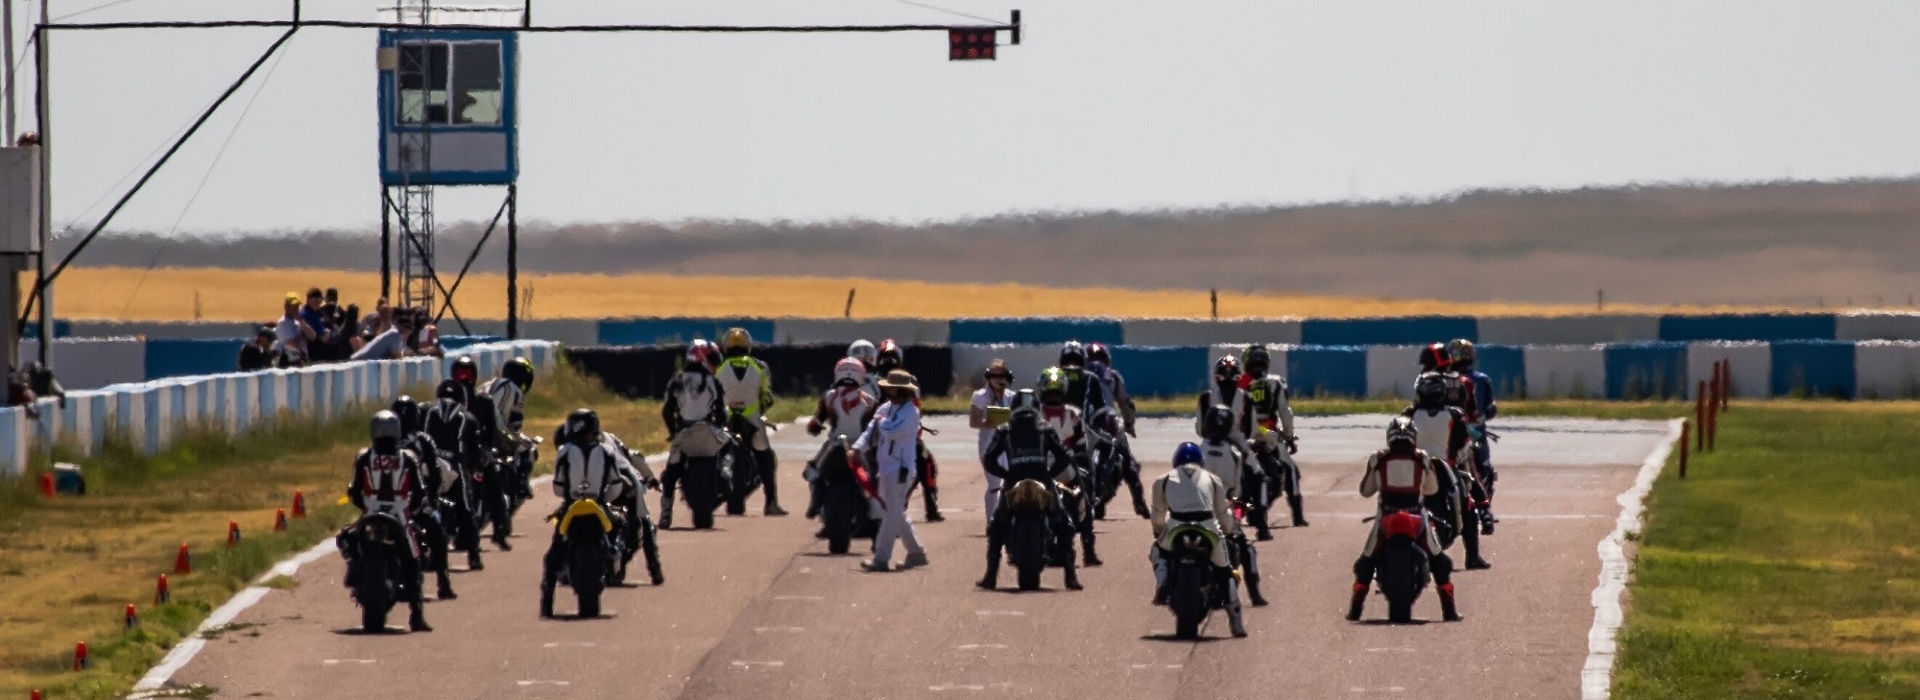 Motorcycle road racers on the grid at High Plains Raceway (HPR). Photo by Jim Browning, courtesy of HPR.